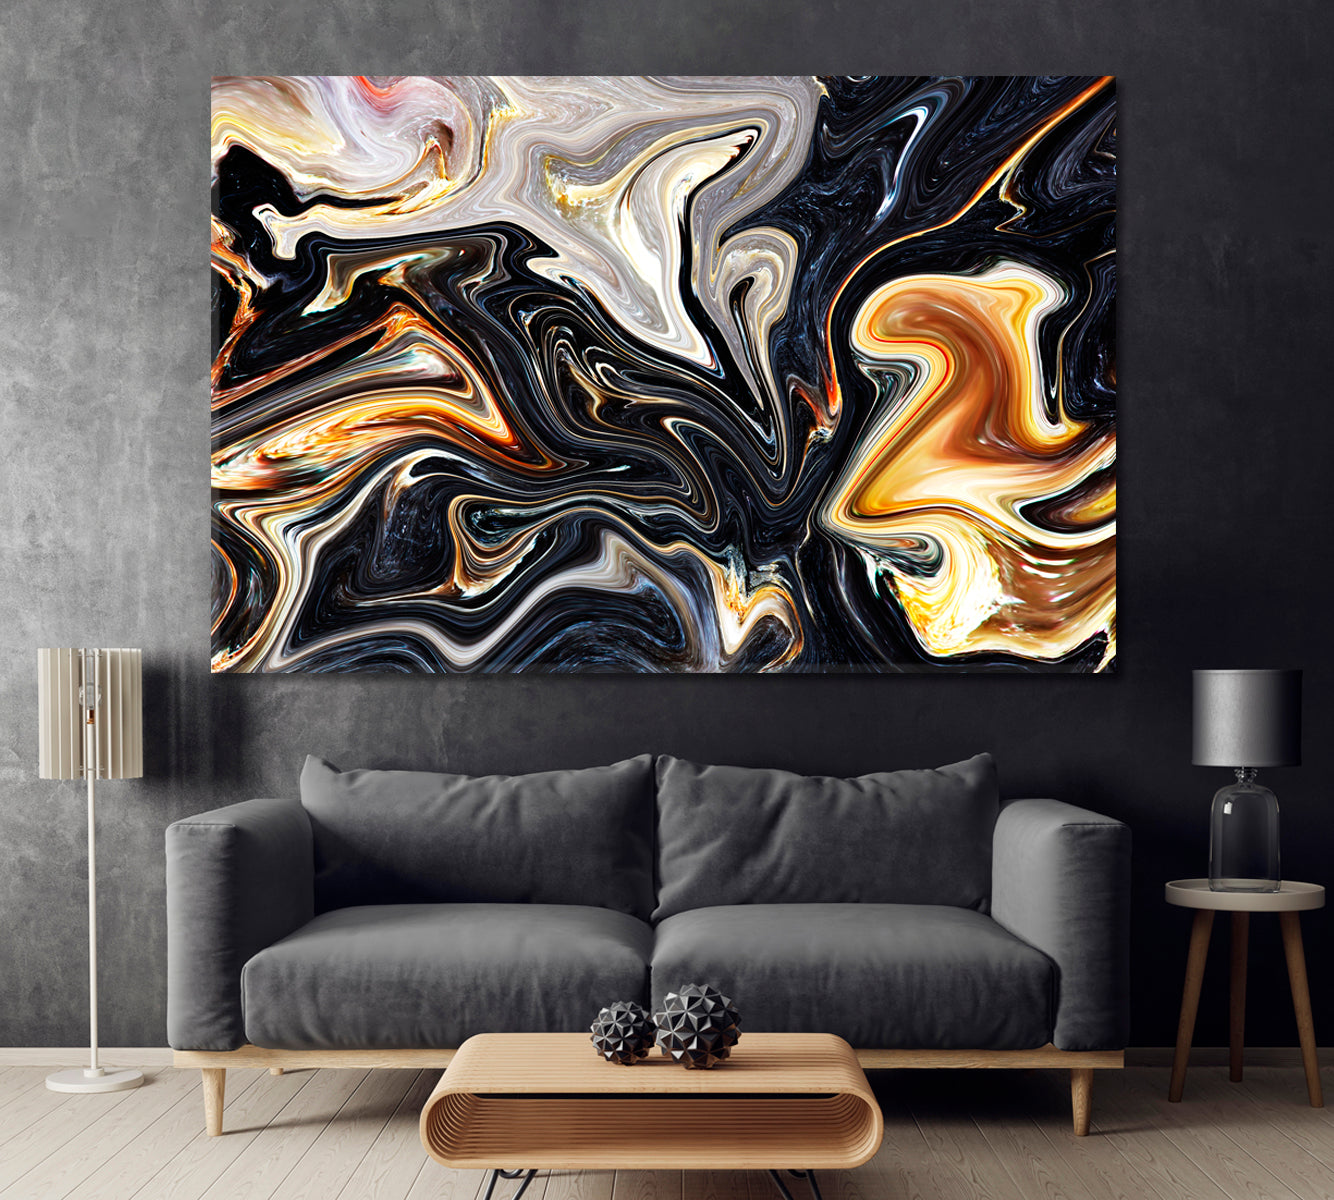 Black Marble Waves Canvas Print ArtLexy 1 Panel 24"x16" inches 